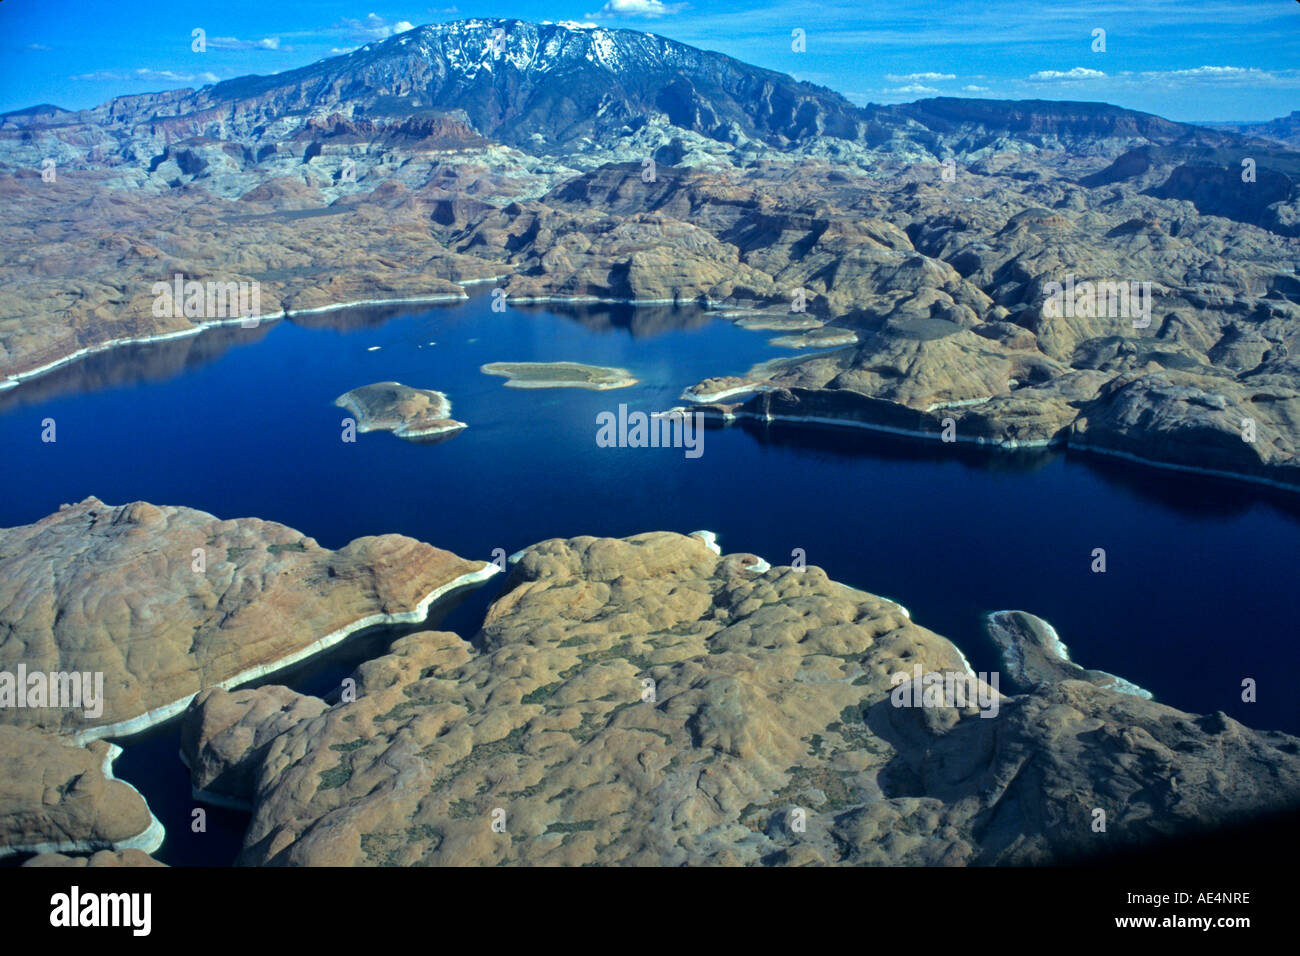 Aerial views of dramatic desert landscape surround Lake Powell in southwest United States. Stock Photo